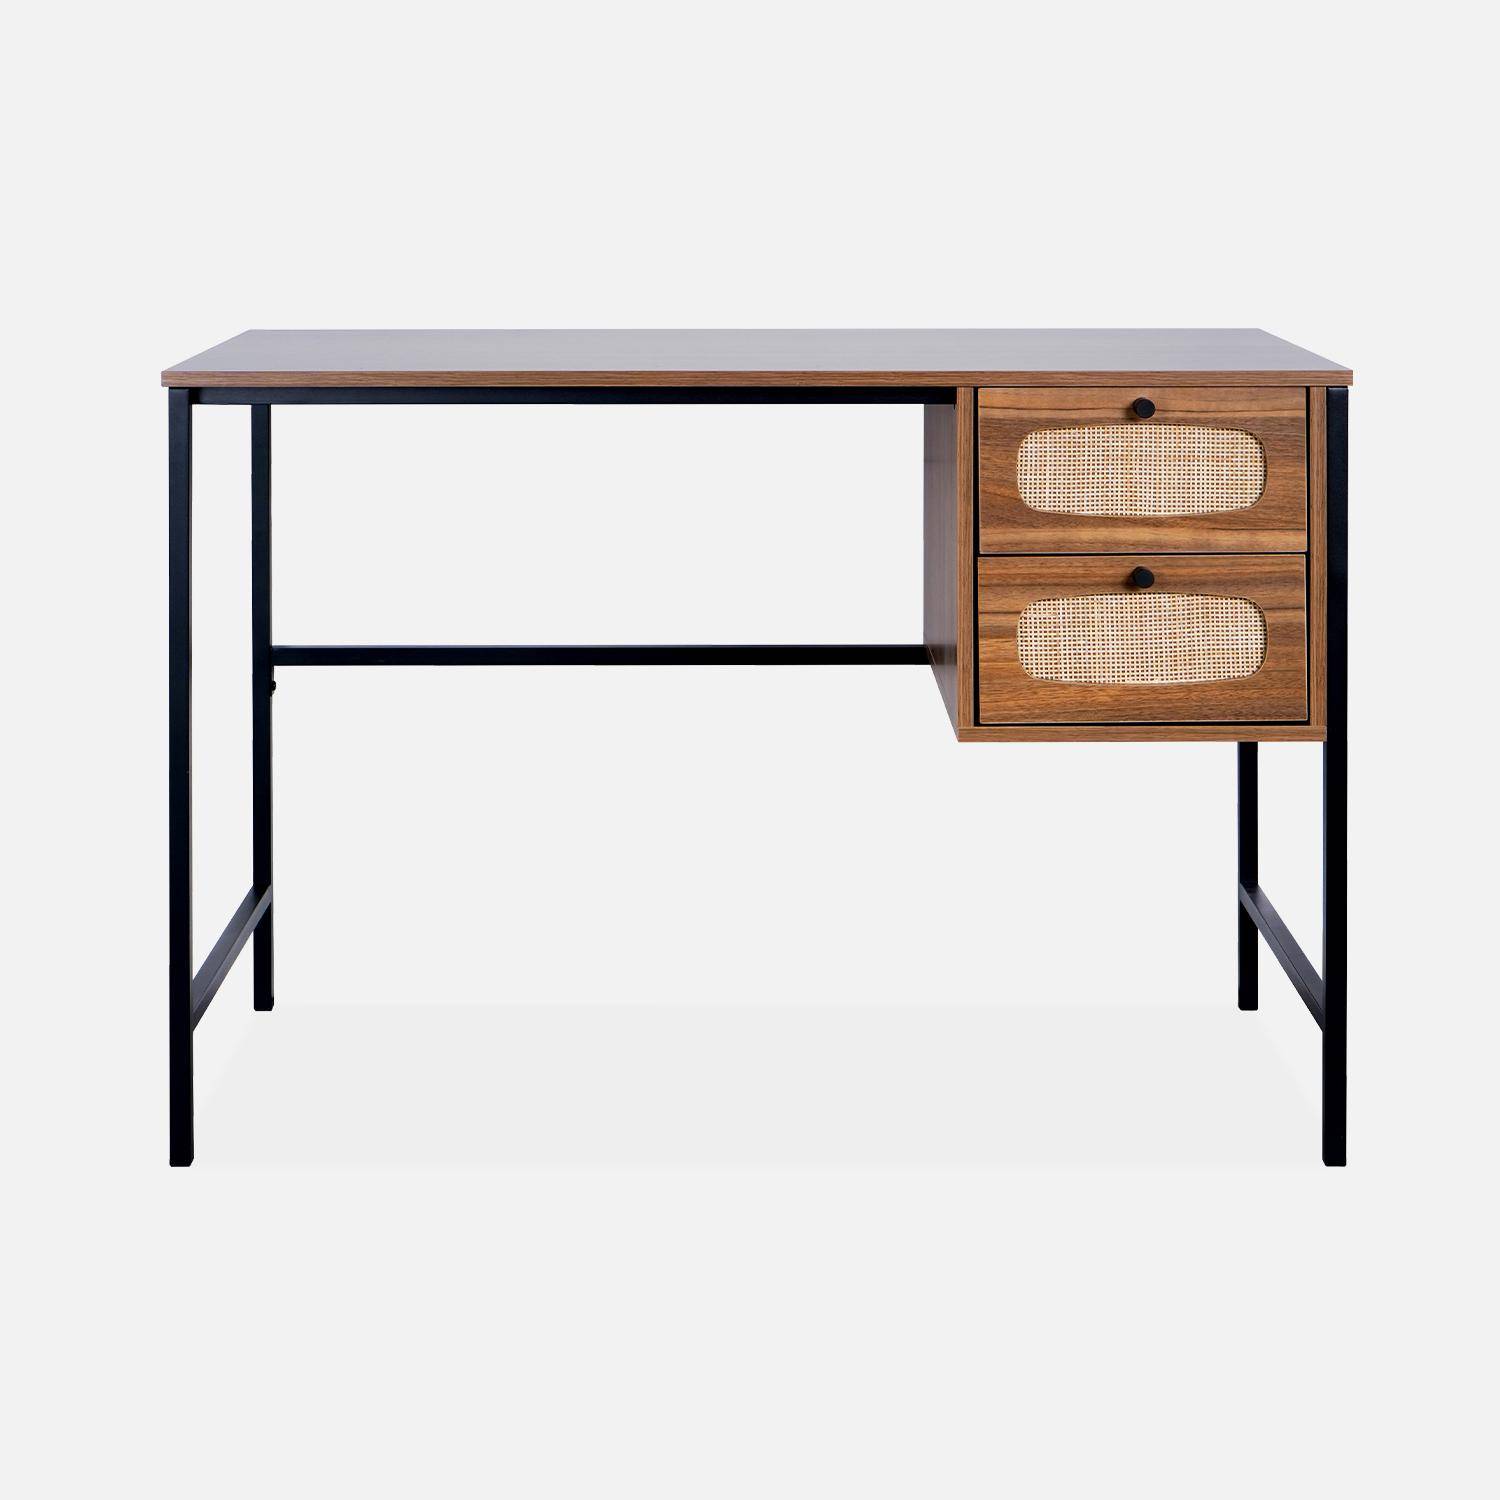 Retro wood and cane desk with black metal legs and handles Photo4